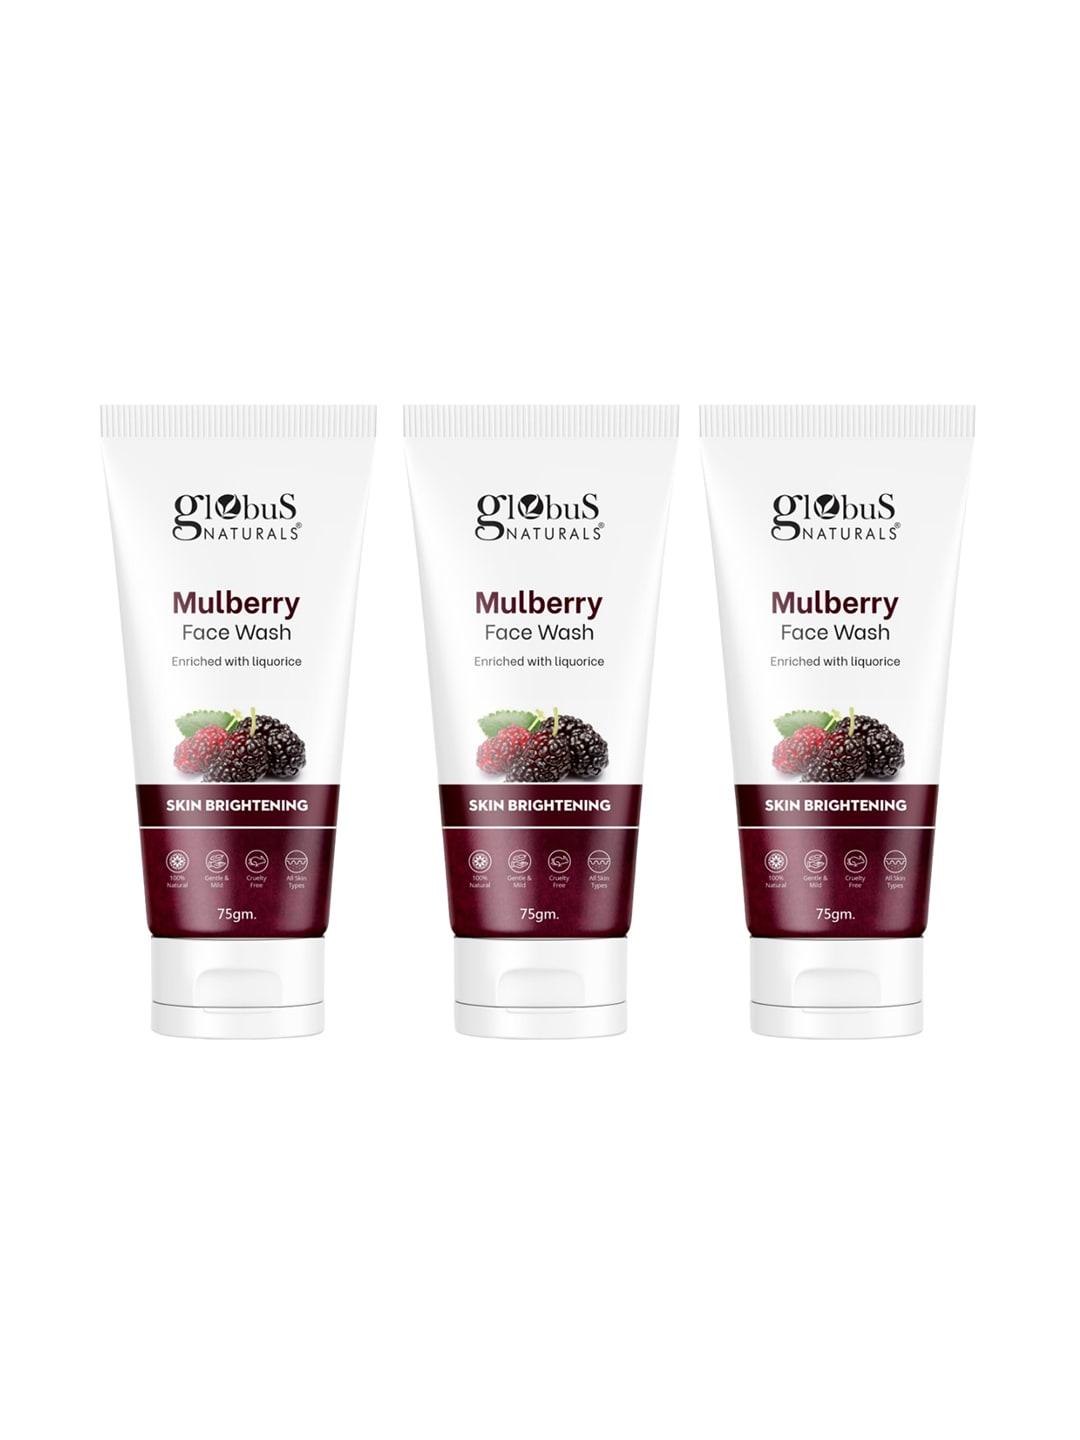 Globus naturals Set Of 3 Mulberry Fairness Face Wash For Even Skin Tone - 75 gm Each